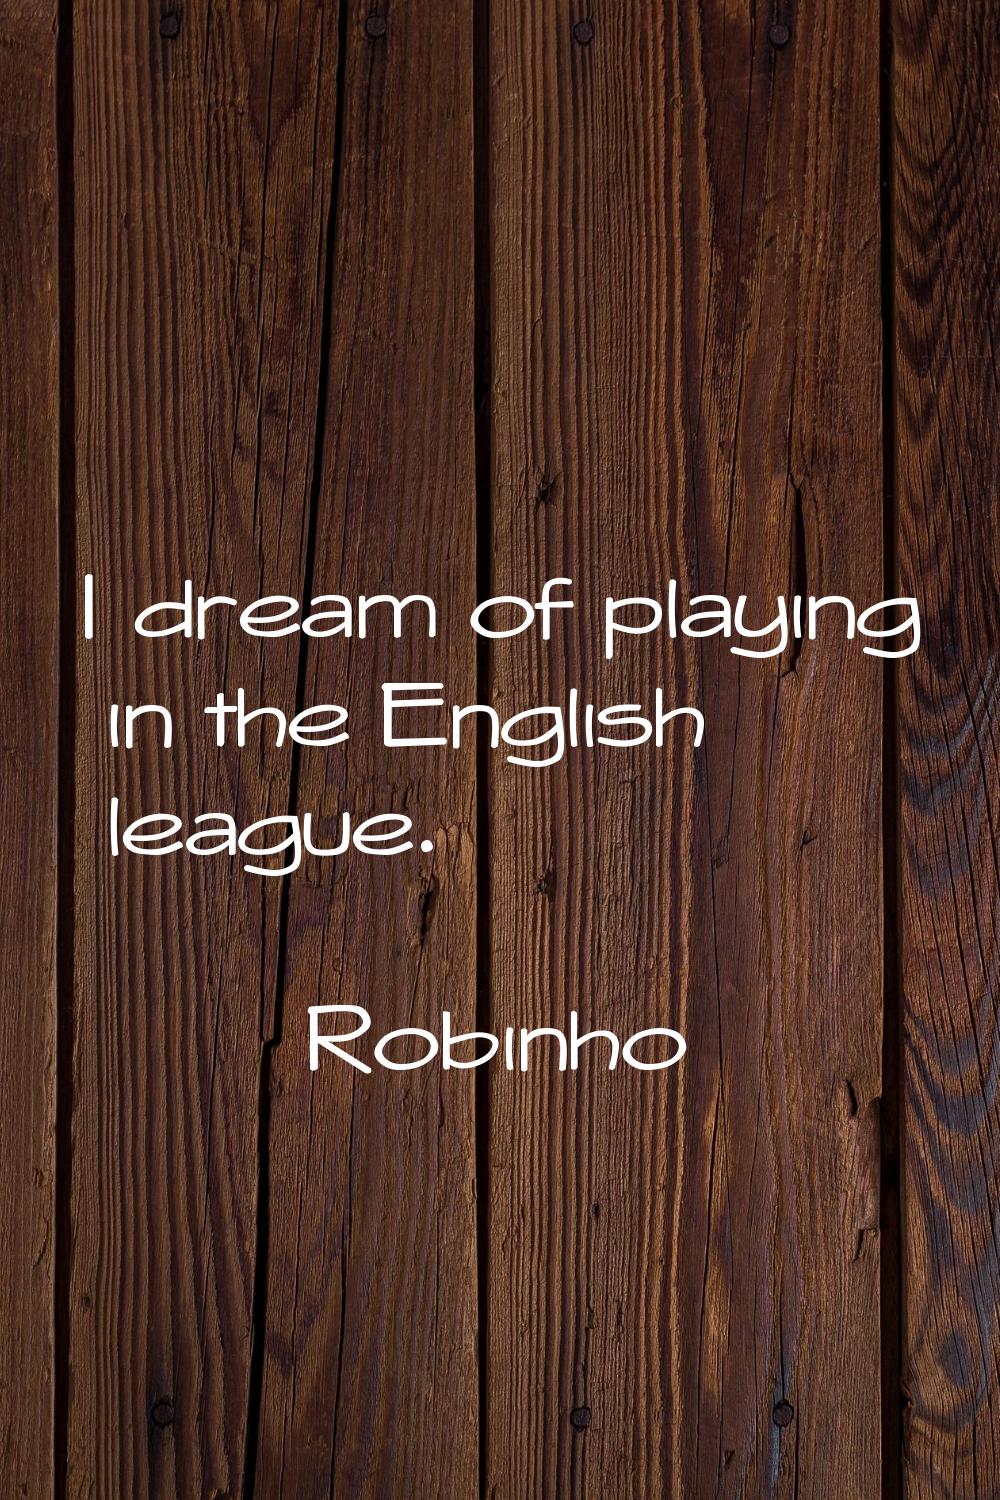 I dream of playing in the English league.